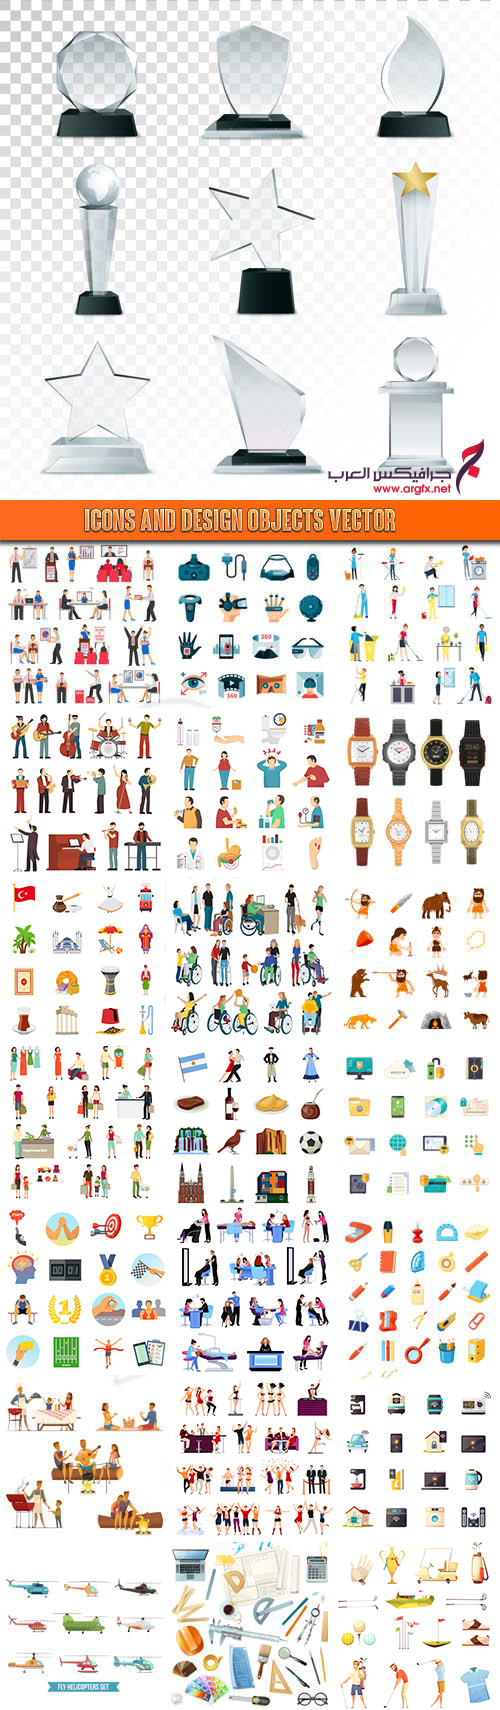  Icons and design objects vector